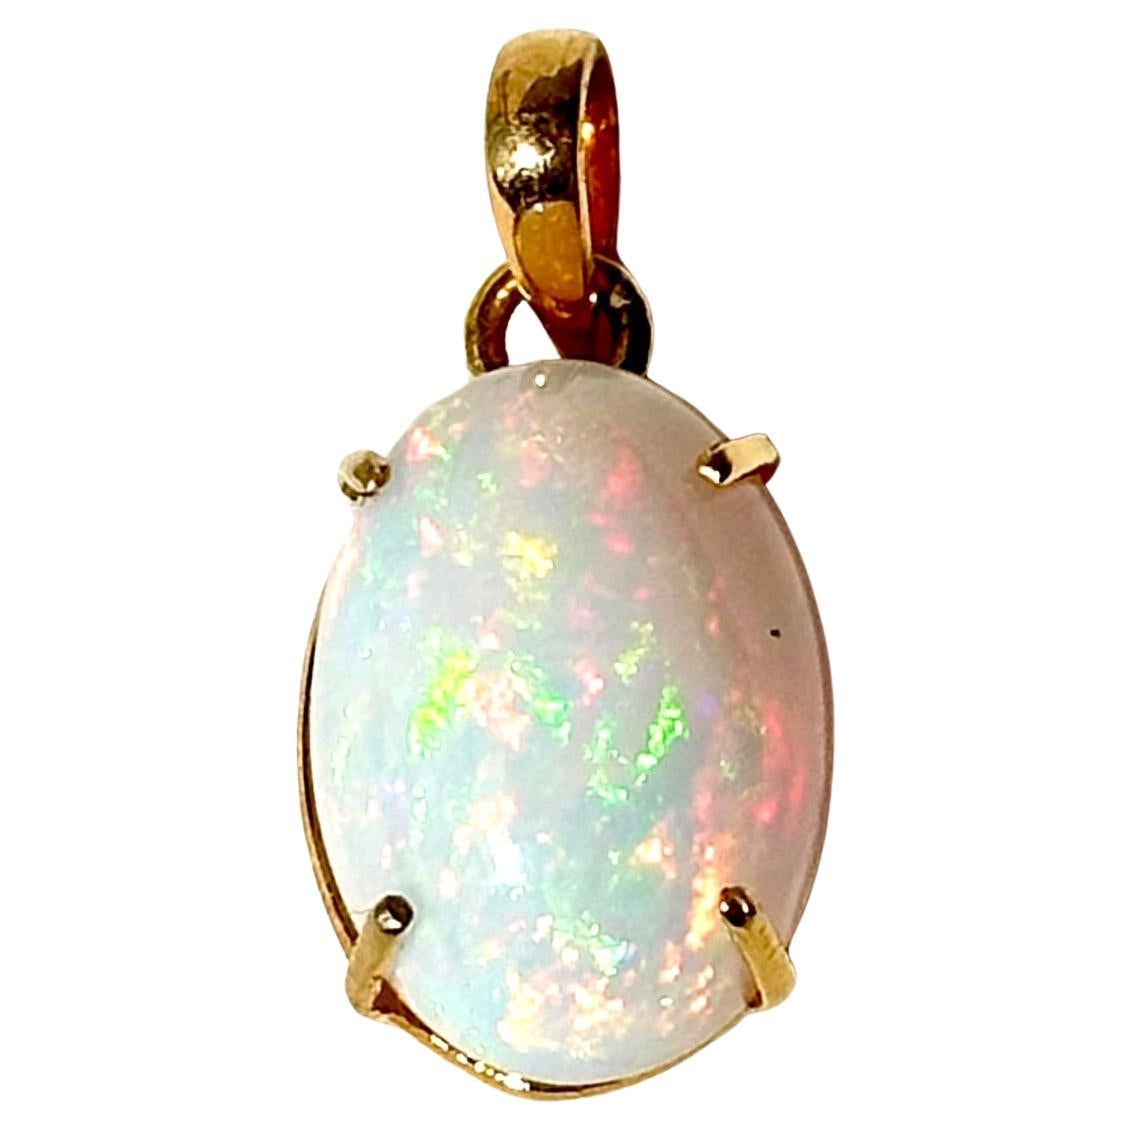 12.62ct Ethiopian opal stone in 14k yellow gold for pendant